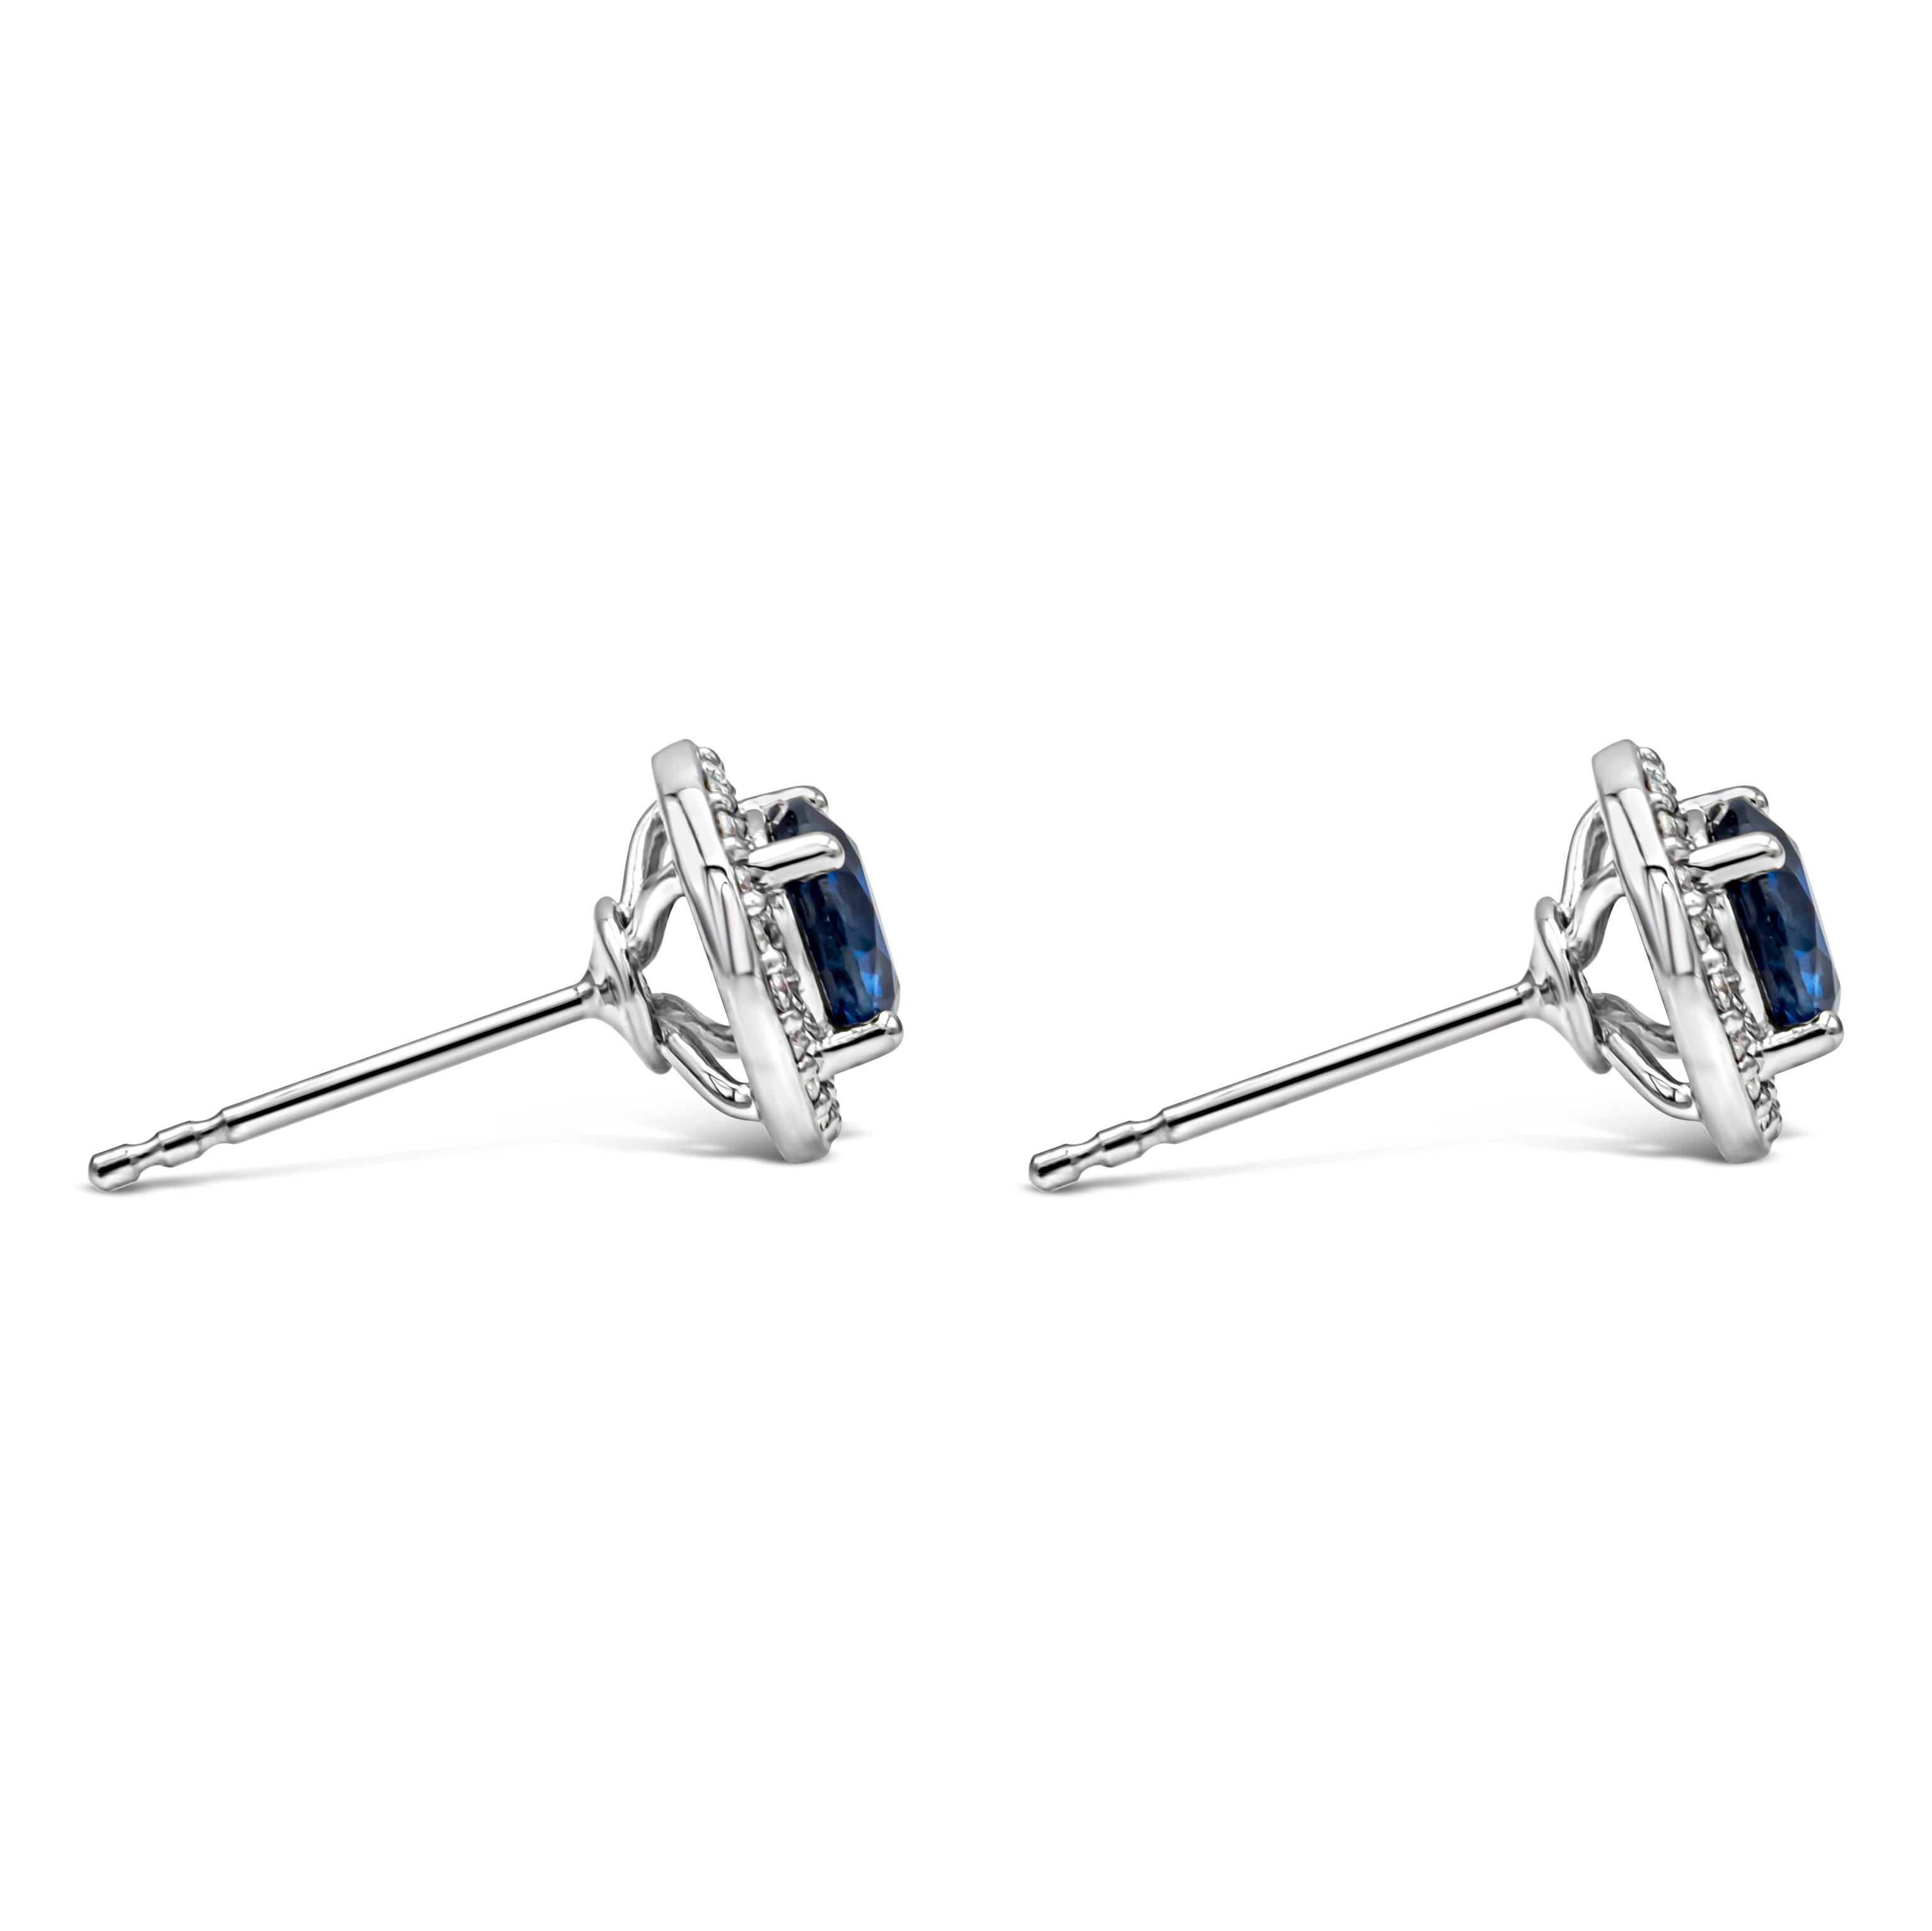 Contemporary 1.52 Carats Total Round Cut Royal Blue Sapphire and Diamond Halo Stud Earrings For Sale